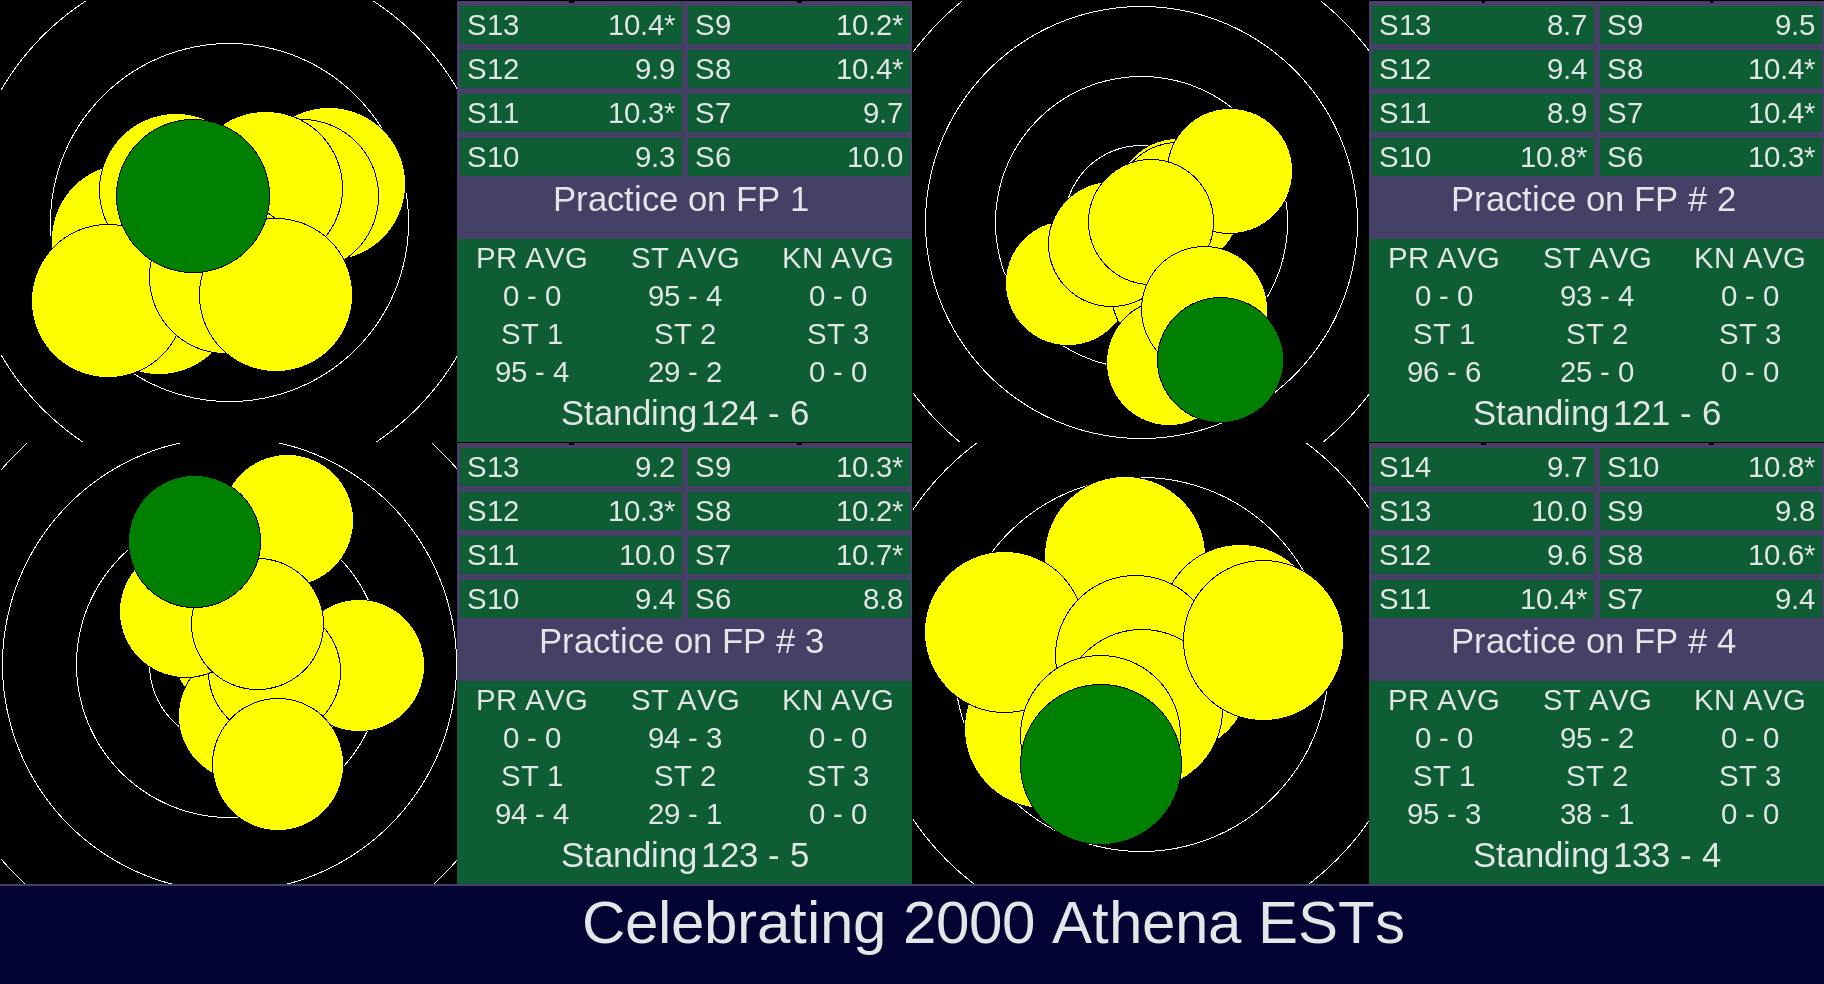 2000 Athena Targets and Counting